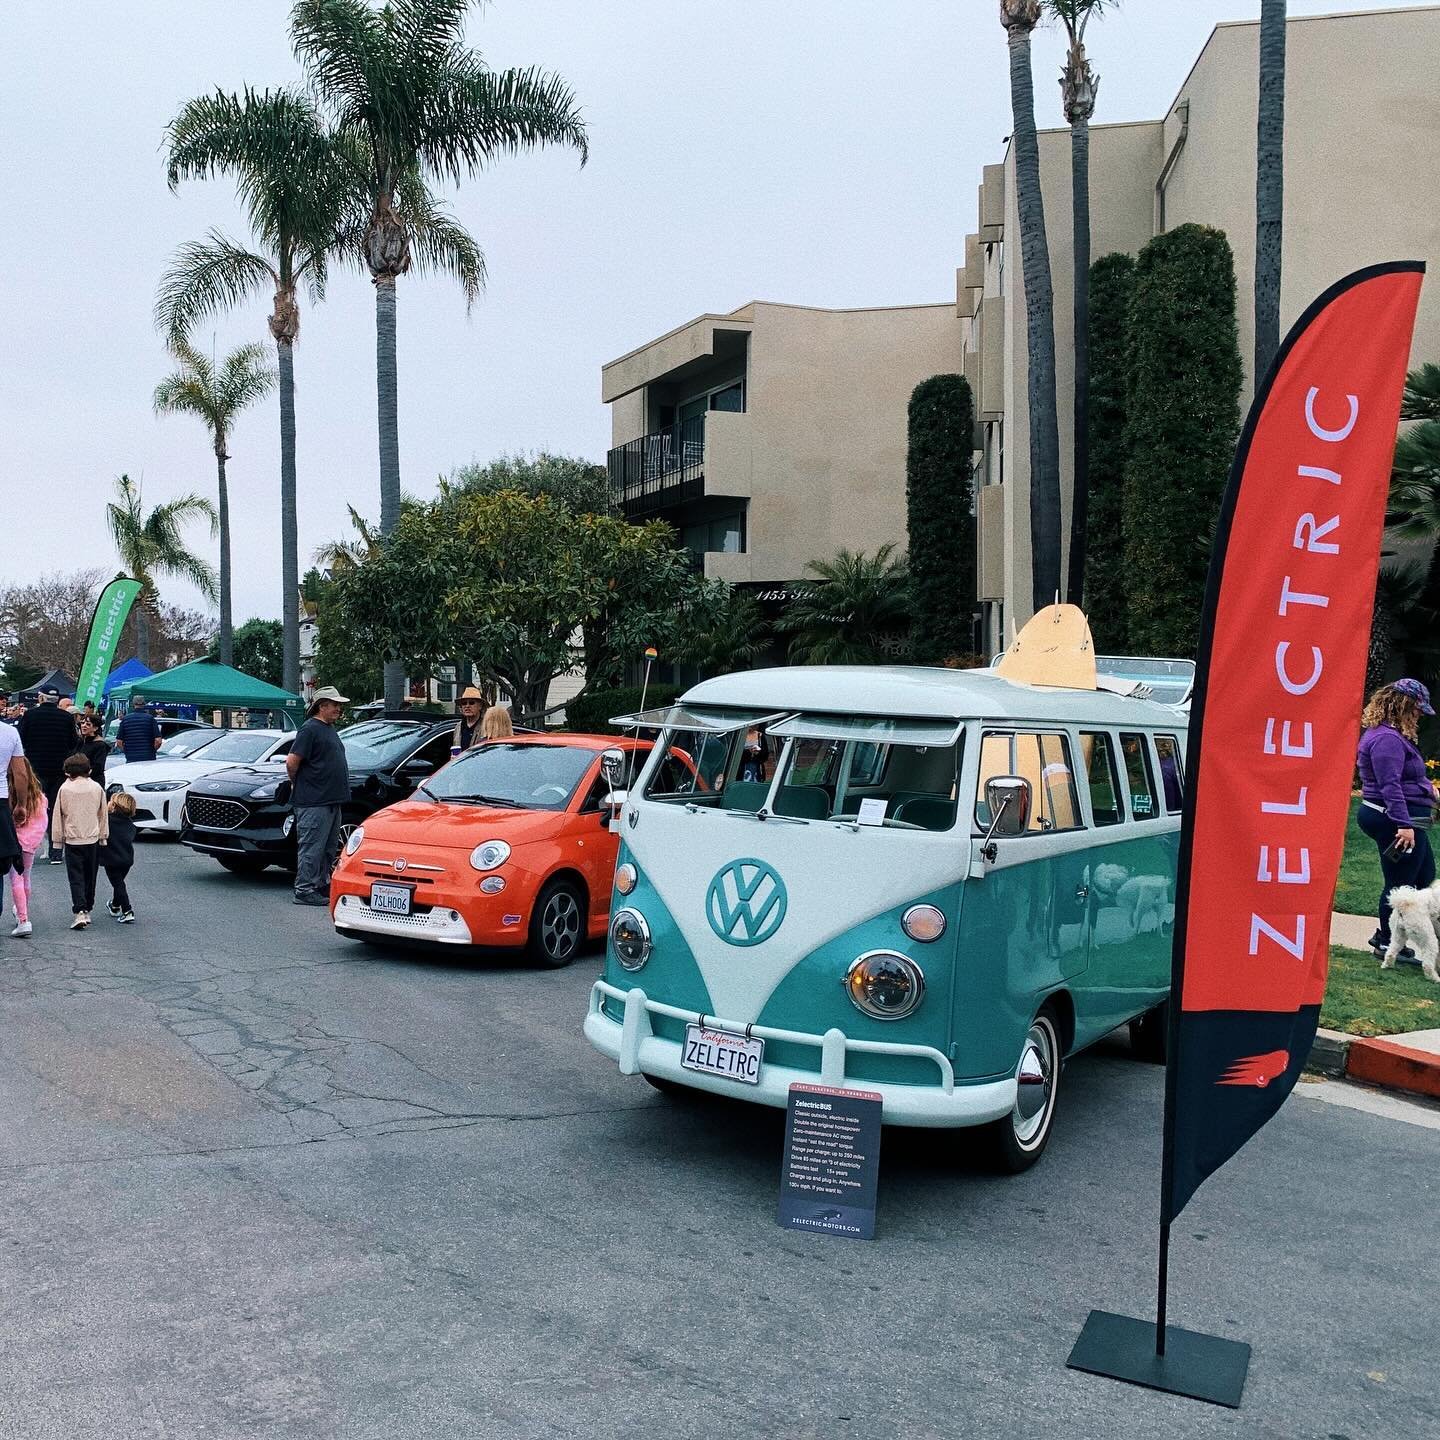 Don&rsquo;t miss our EV section at Motorcars on Main Street this year! 🔋⚡️

Sunday, April 28th from 10 AM- 3 PM 

Find us on Flora Avenue near Star Park Circle.